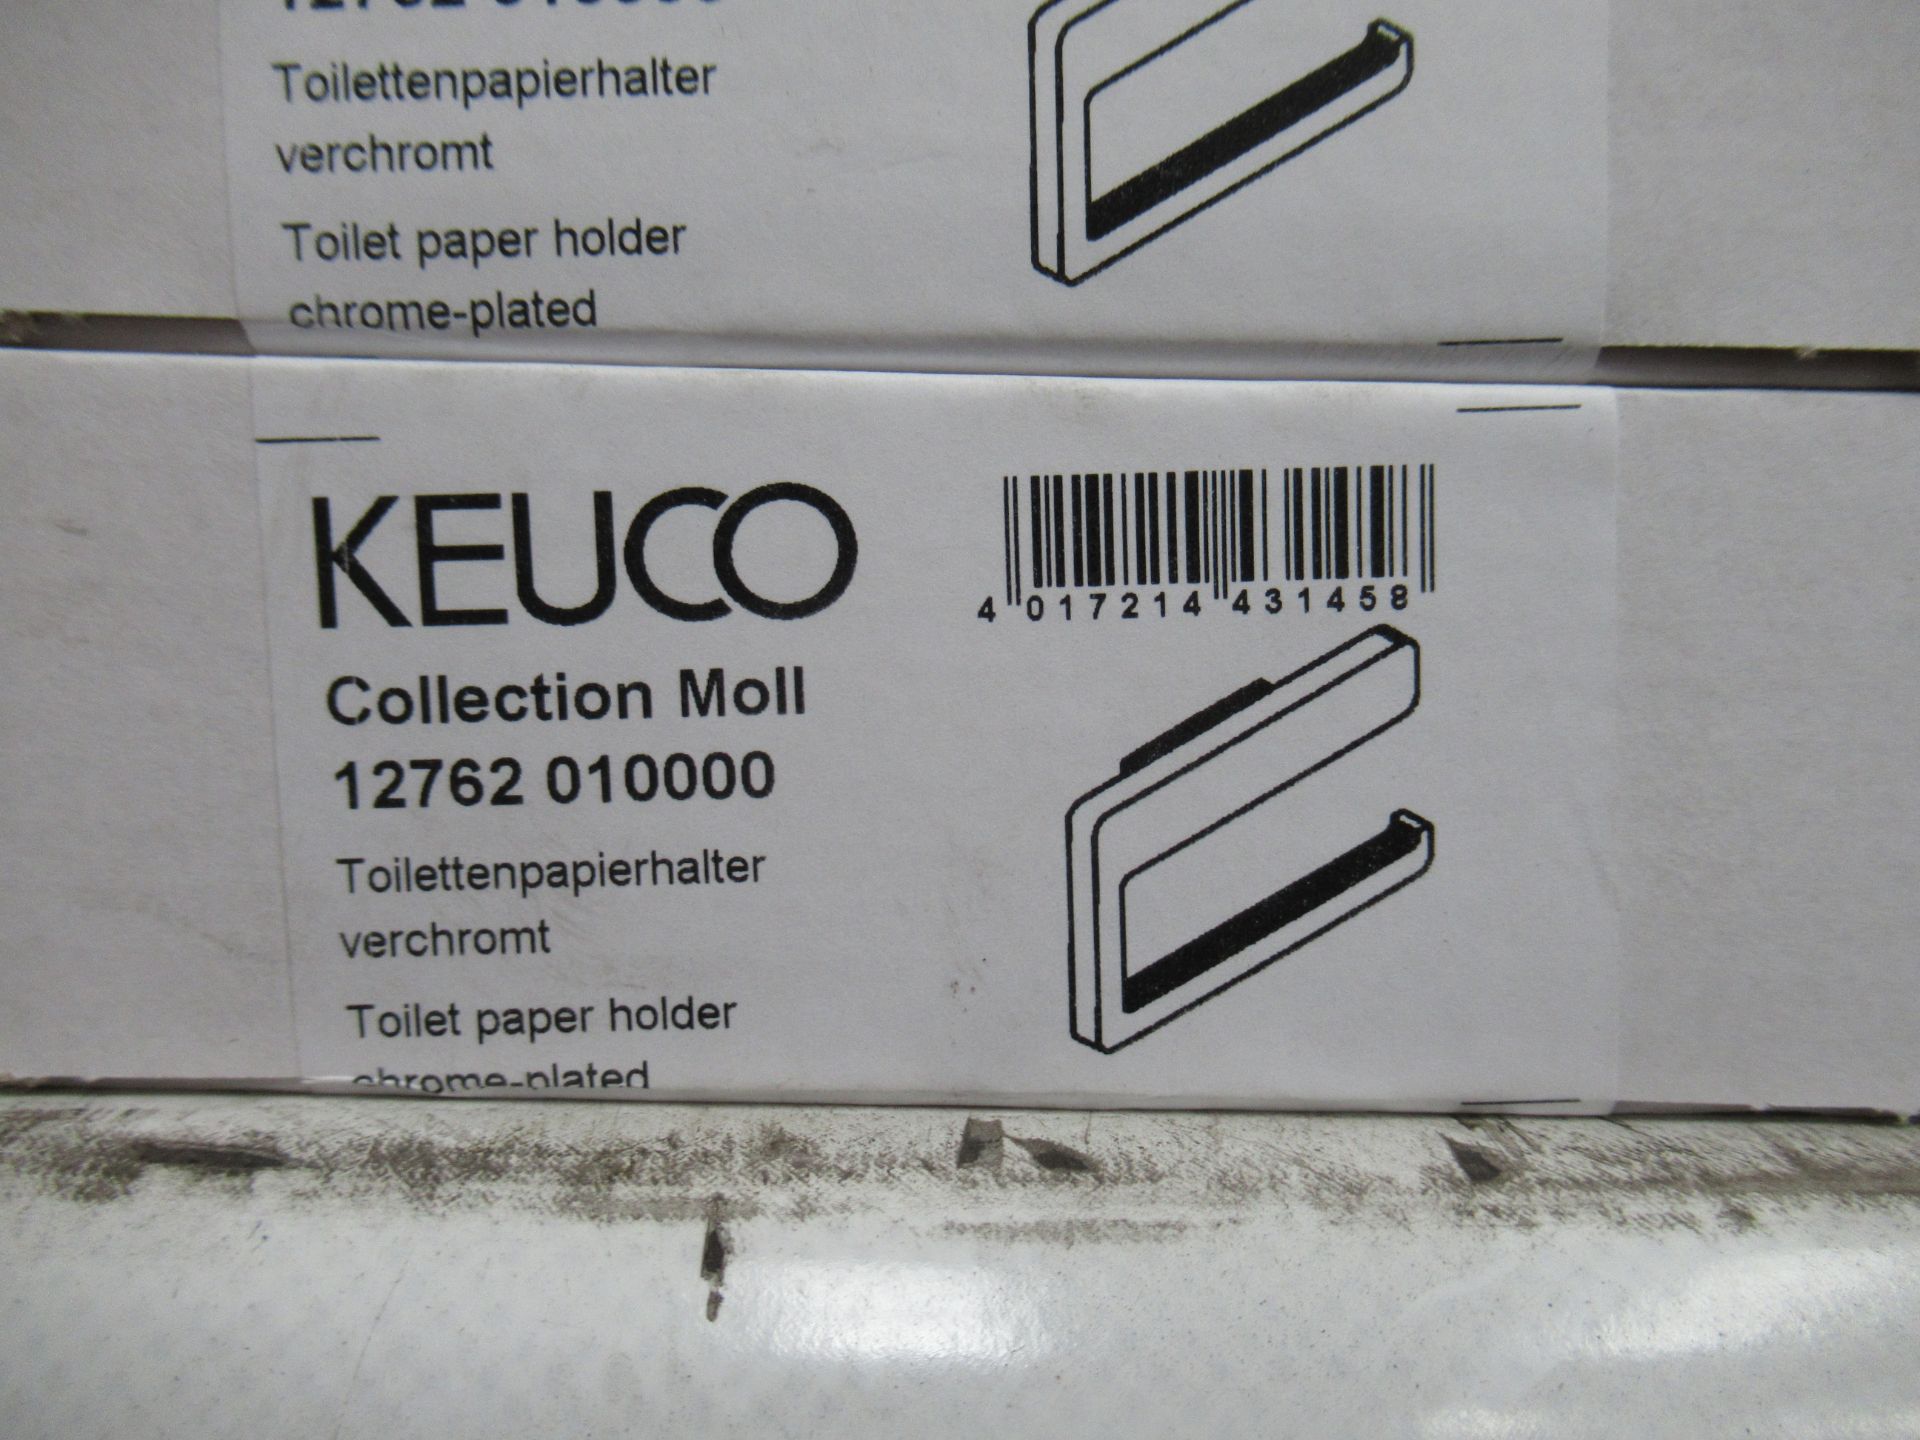 4 x Keuco Collection Moll Toilet Paper Holders Chrome Plated, P/N 12762-010000 - Image 2 of 2